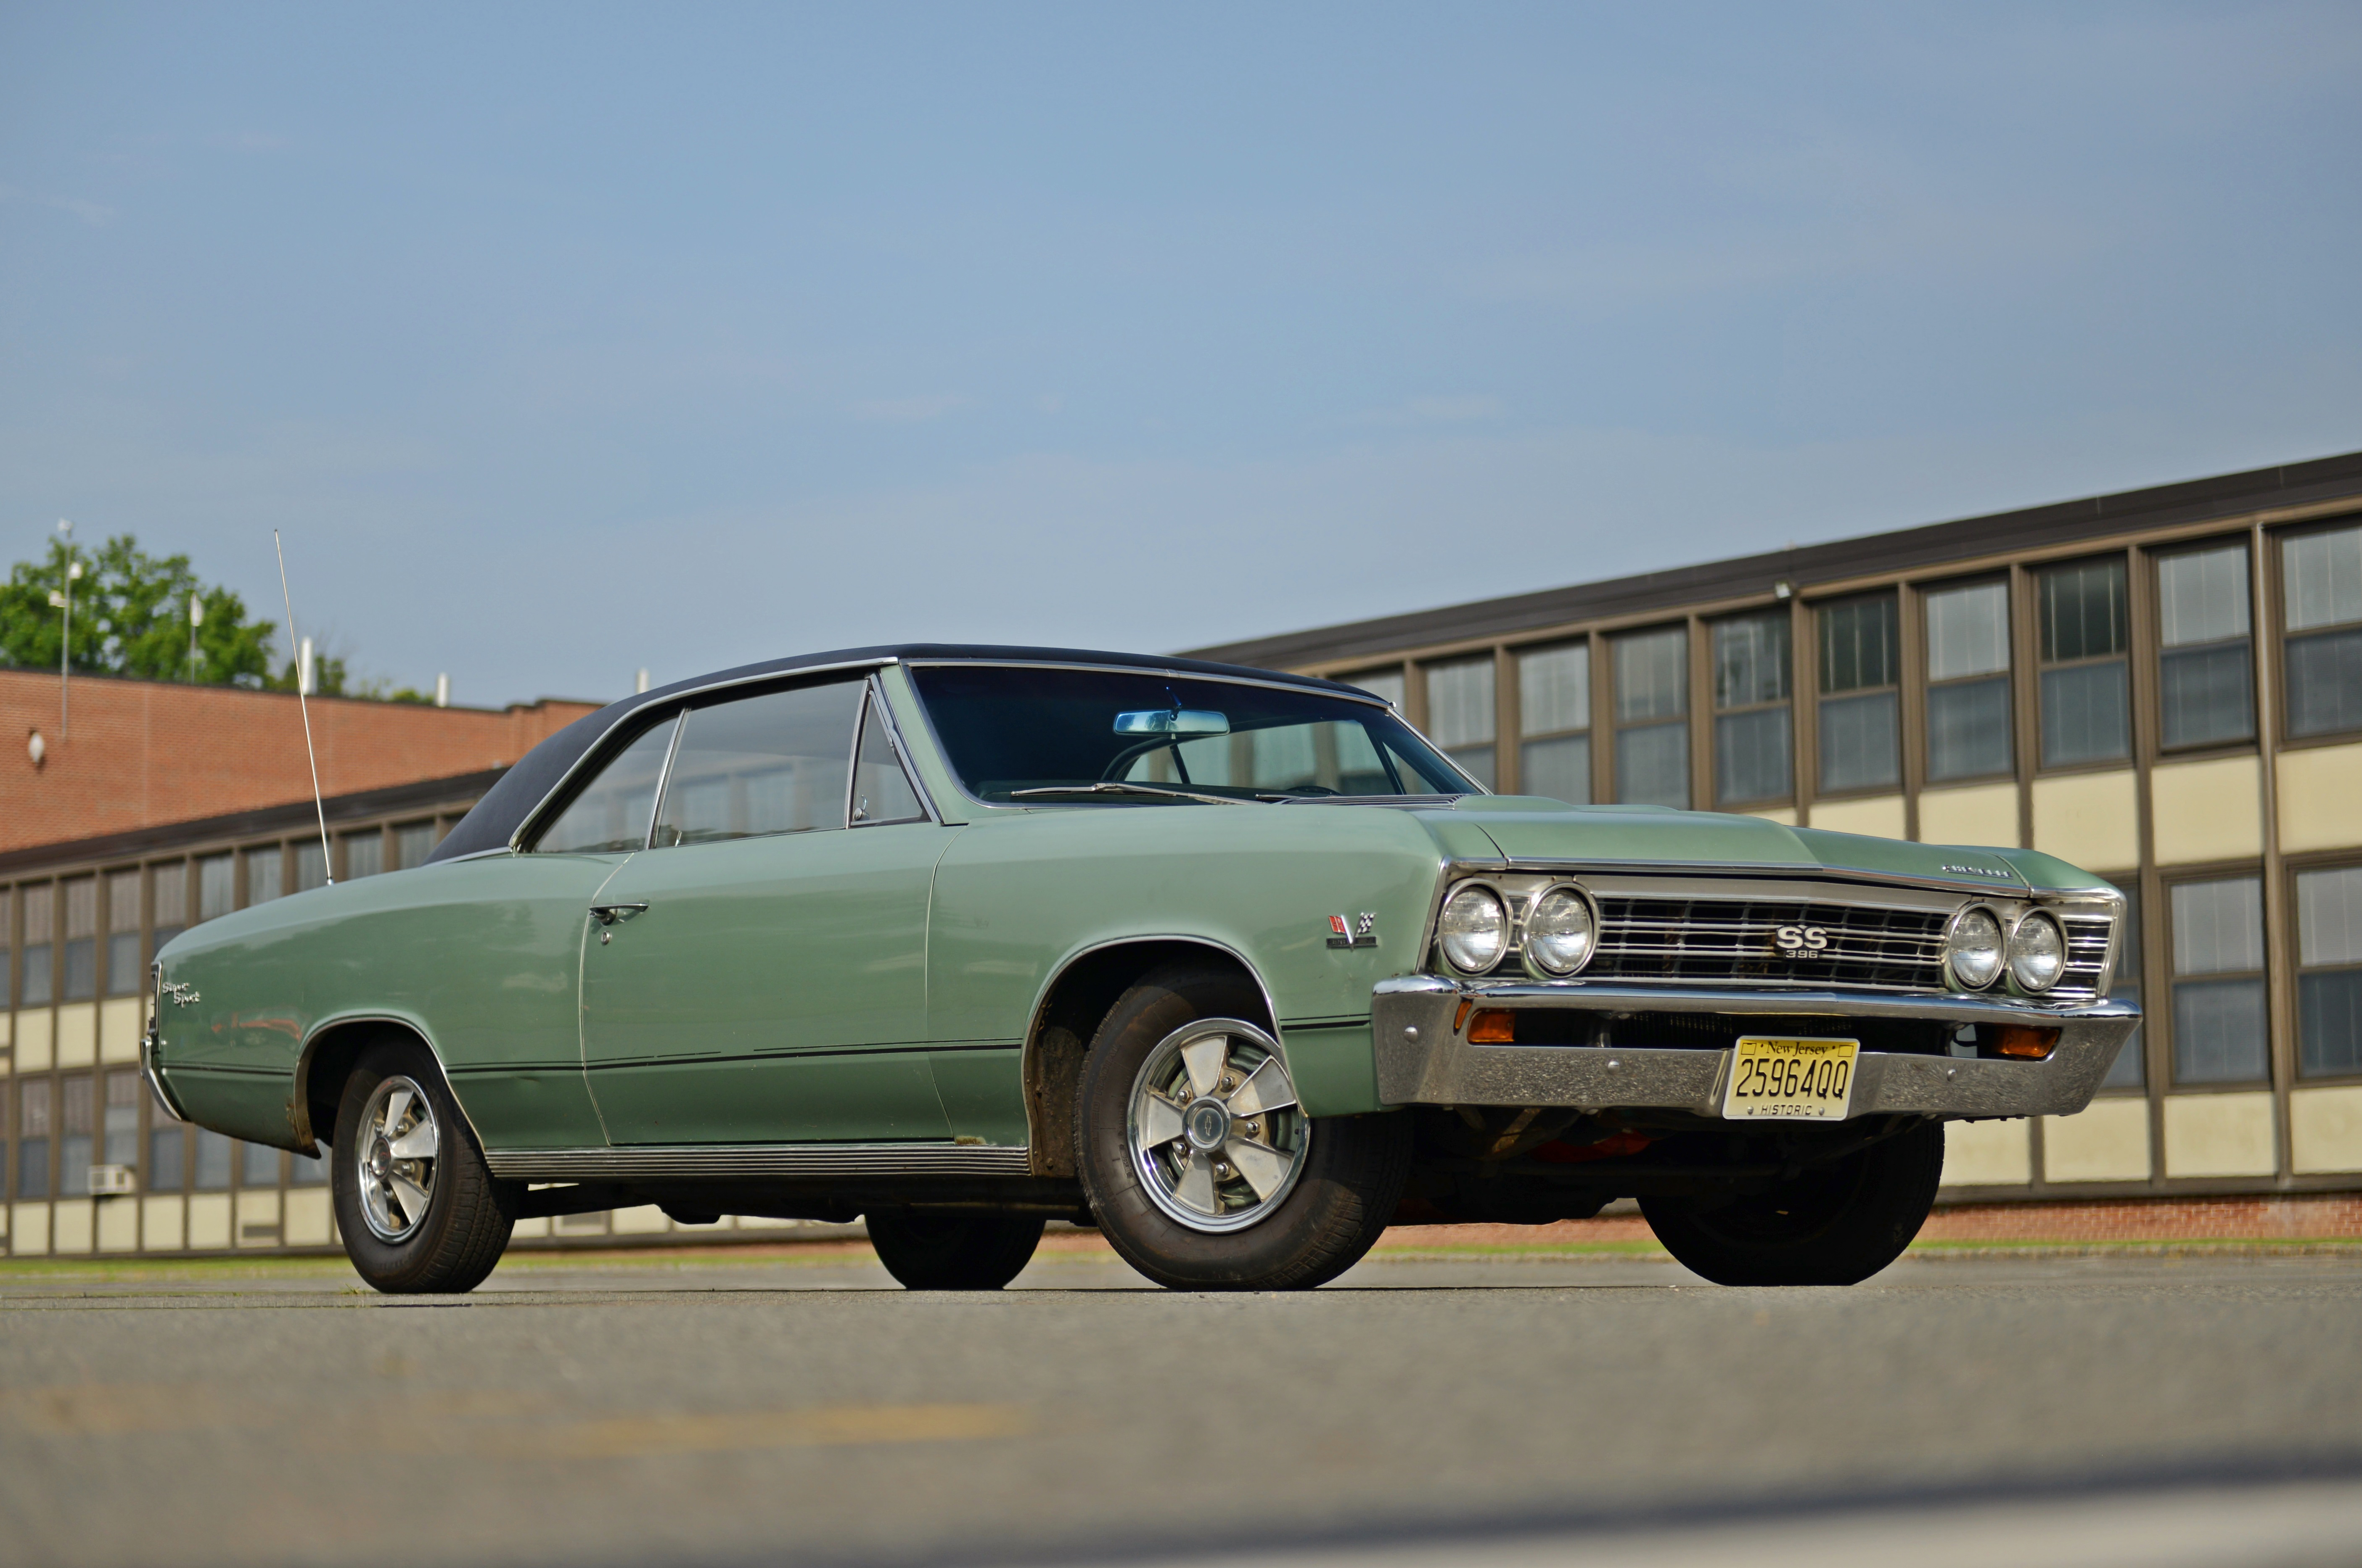 Amazing 1967 Chevrolet Chevelle Pictures & Backgrounds